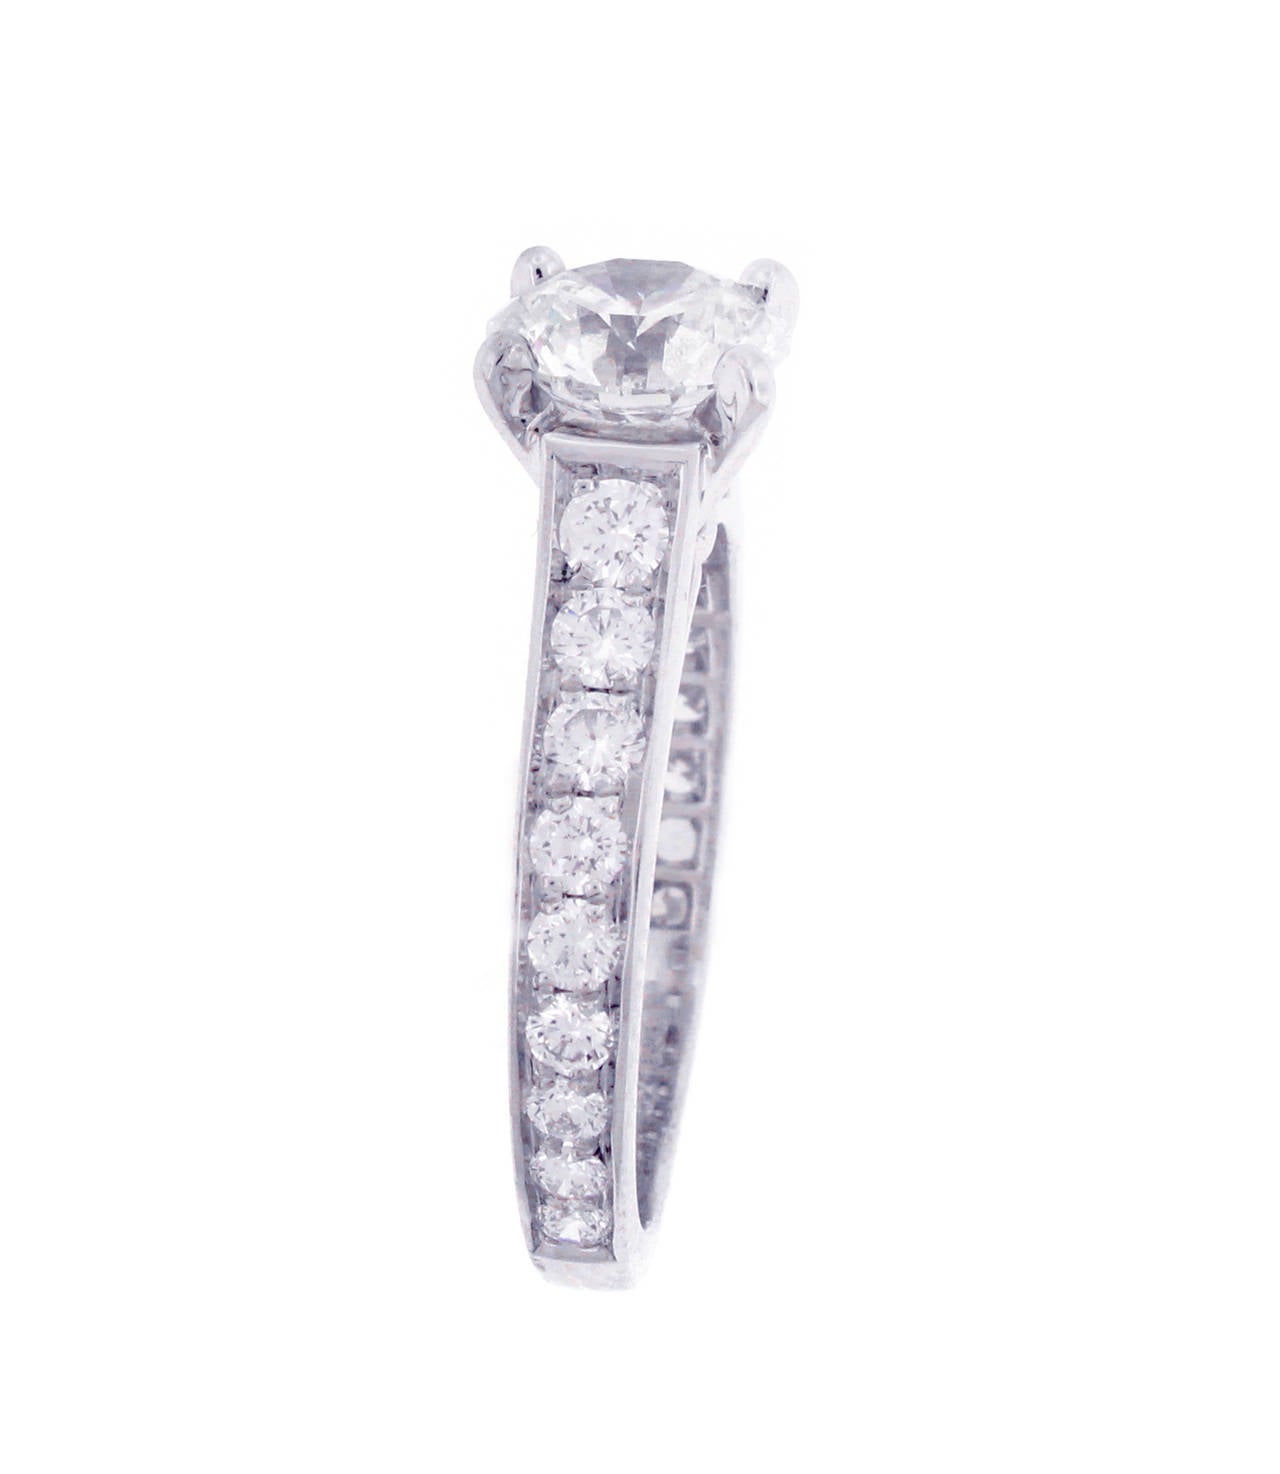 This solitaire has been a Cartier classic since 1895. The elegance of the lines is unique, the refined and light setting allows the light of the diamond to flow freely.

Diamond 1.15 carat F VVS2 GIA 3EX
18 Diamond=.93

Set Platinum, size 4 1/2